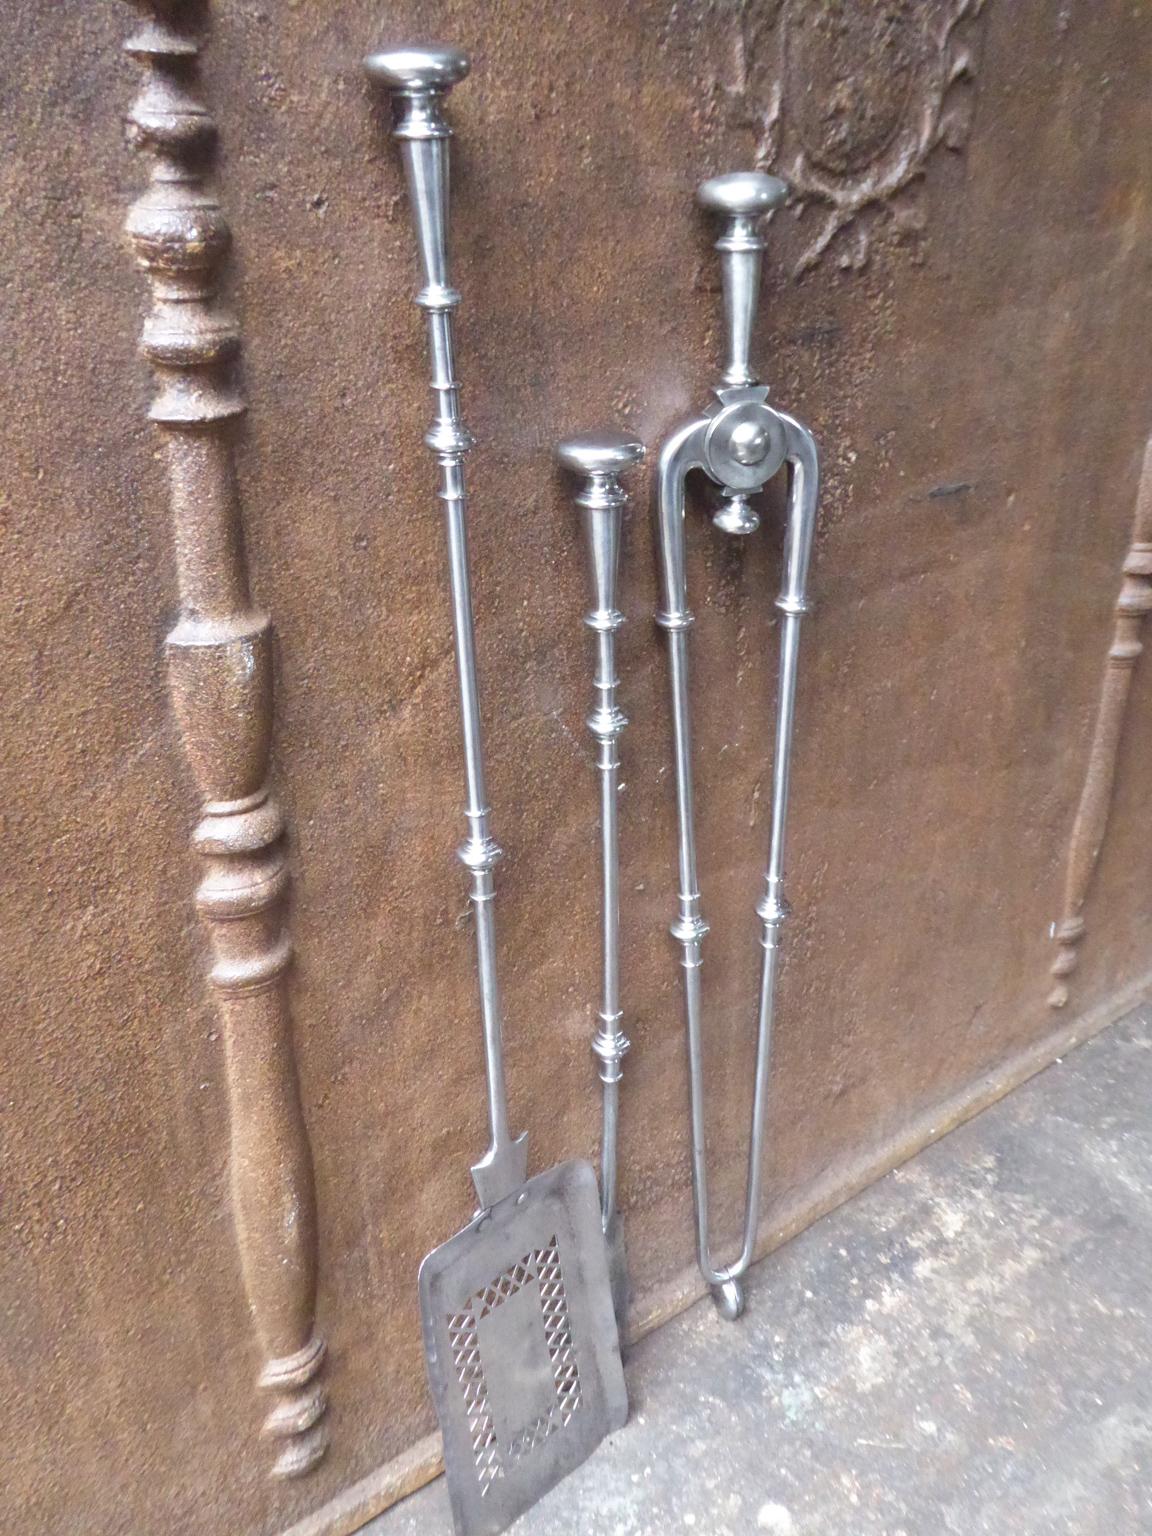 Fine set of three English Georgian fireplace tools made of polished steel, 18th-19th century. The fire tool set is in a good condition and is fully functional.








